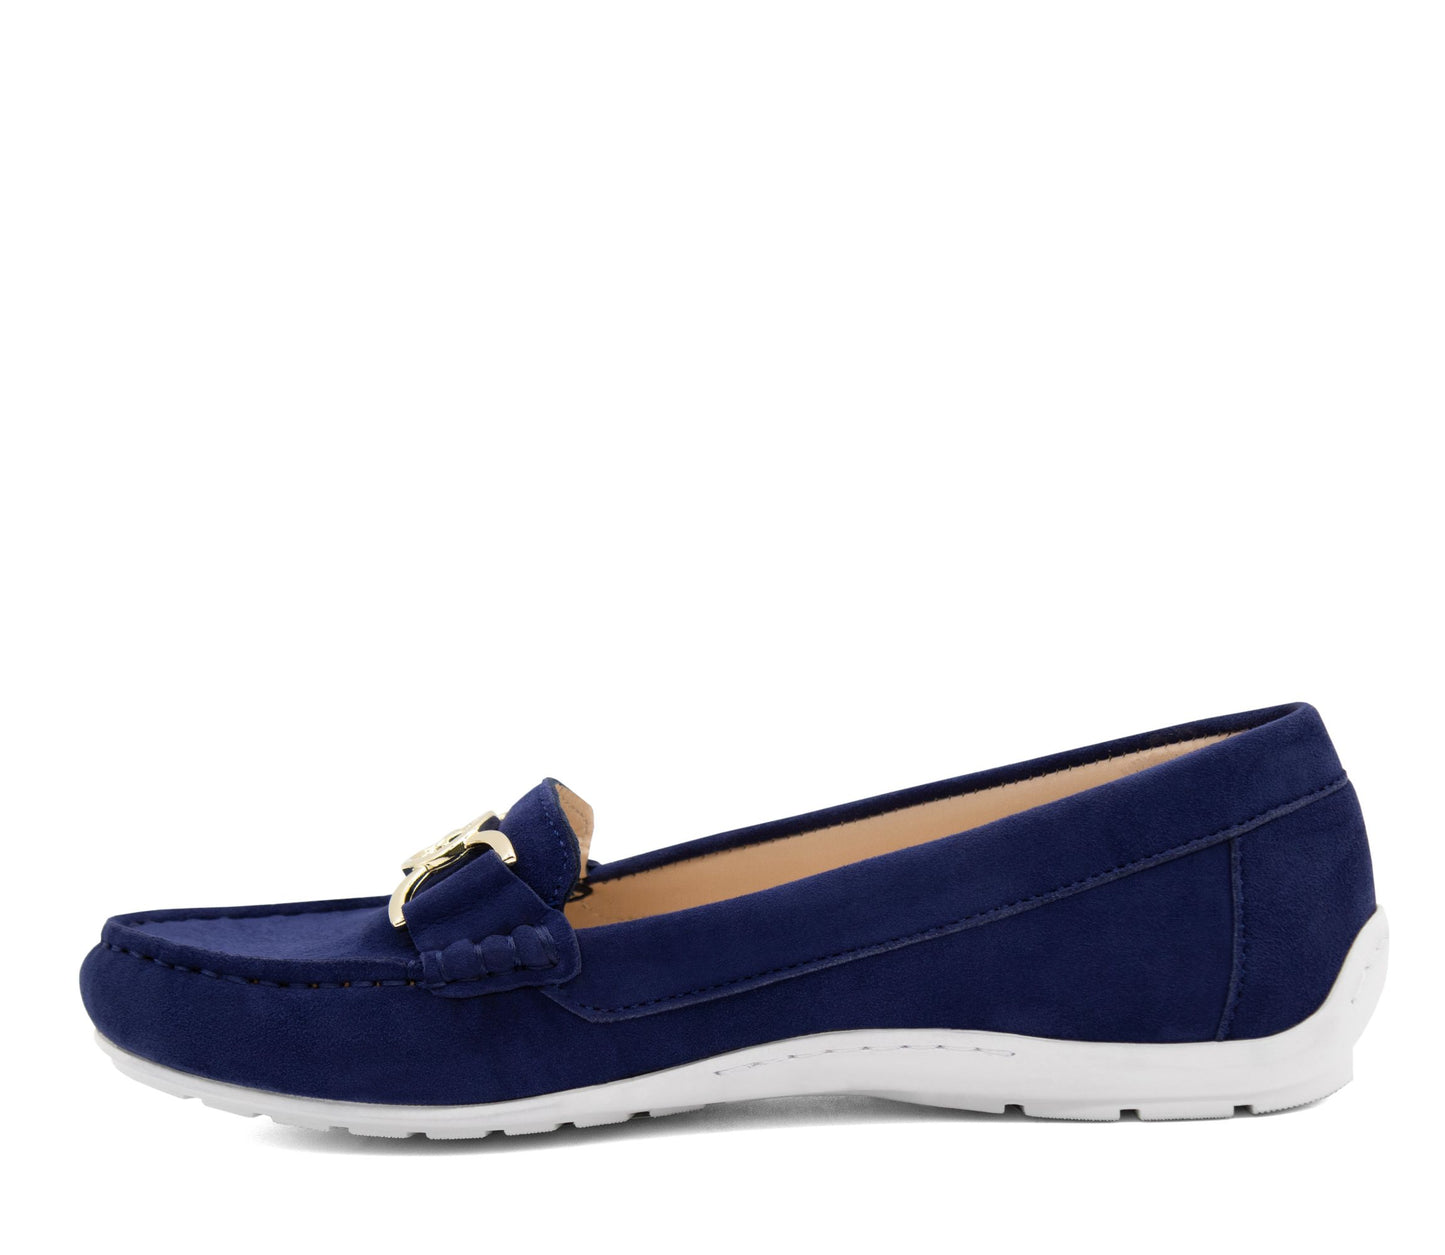 #color_ Navy | Cavalinho Belle Leather Loafers - Navy - 48020001.03_4